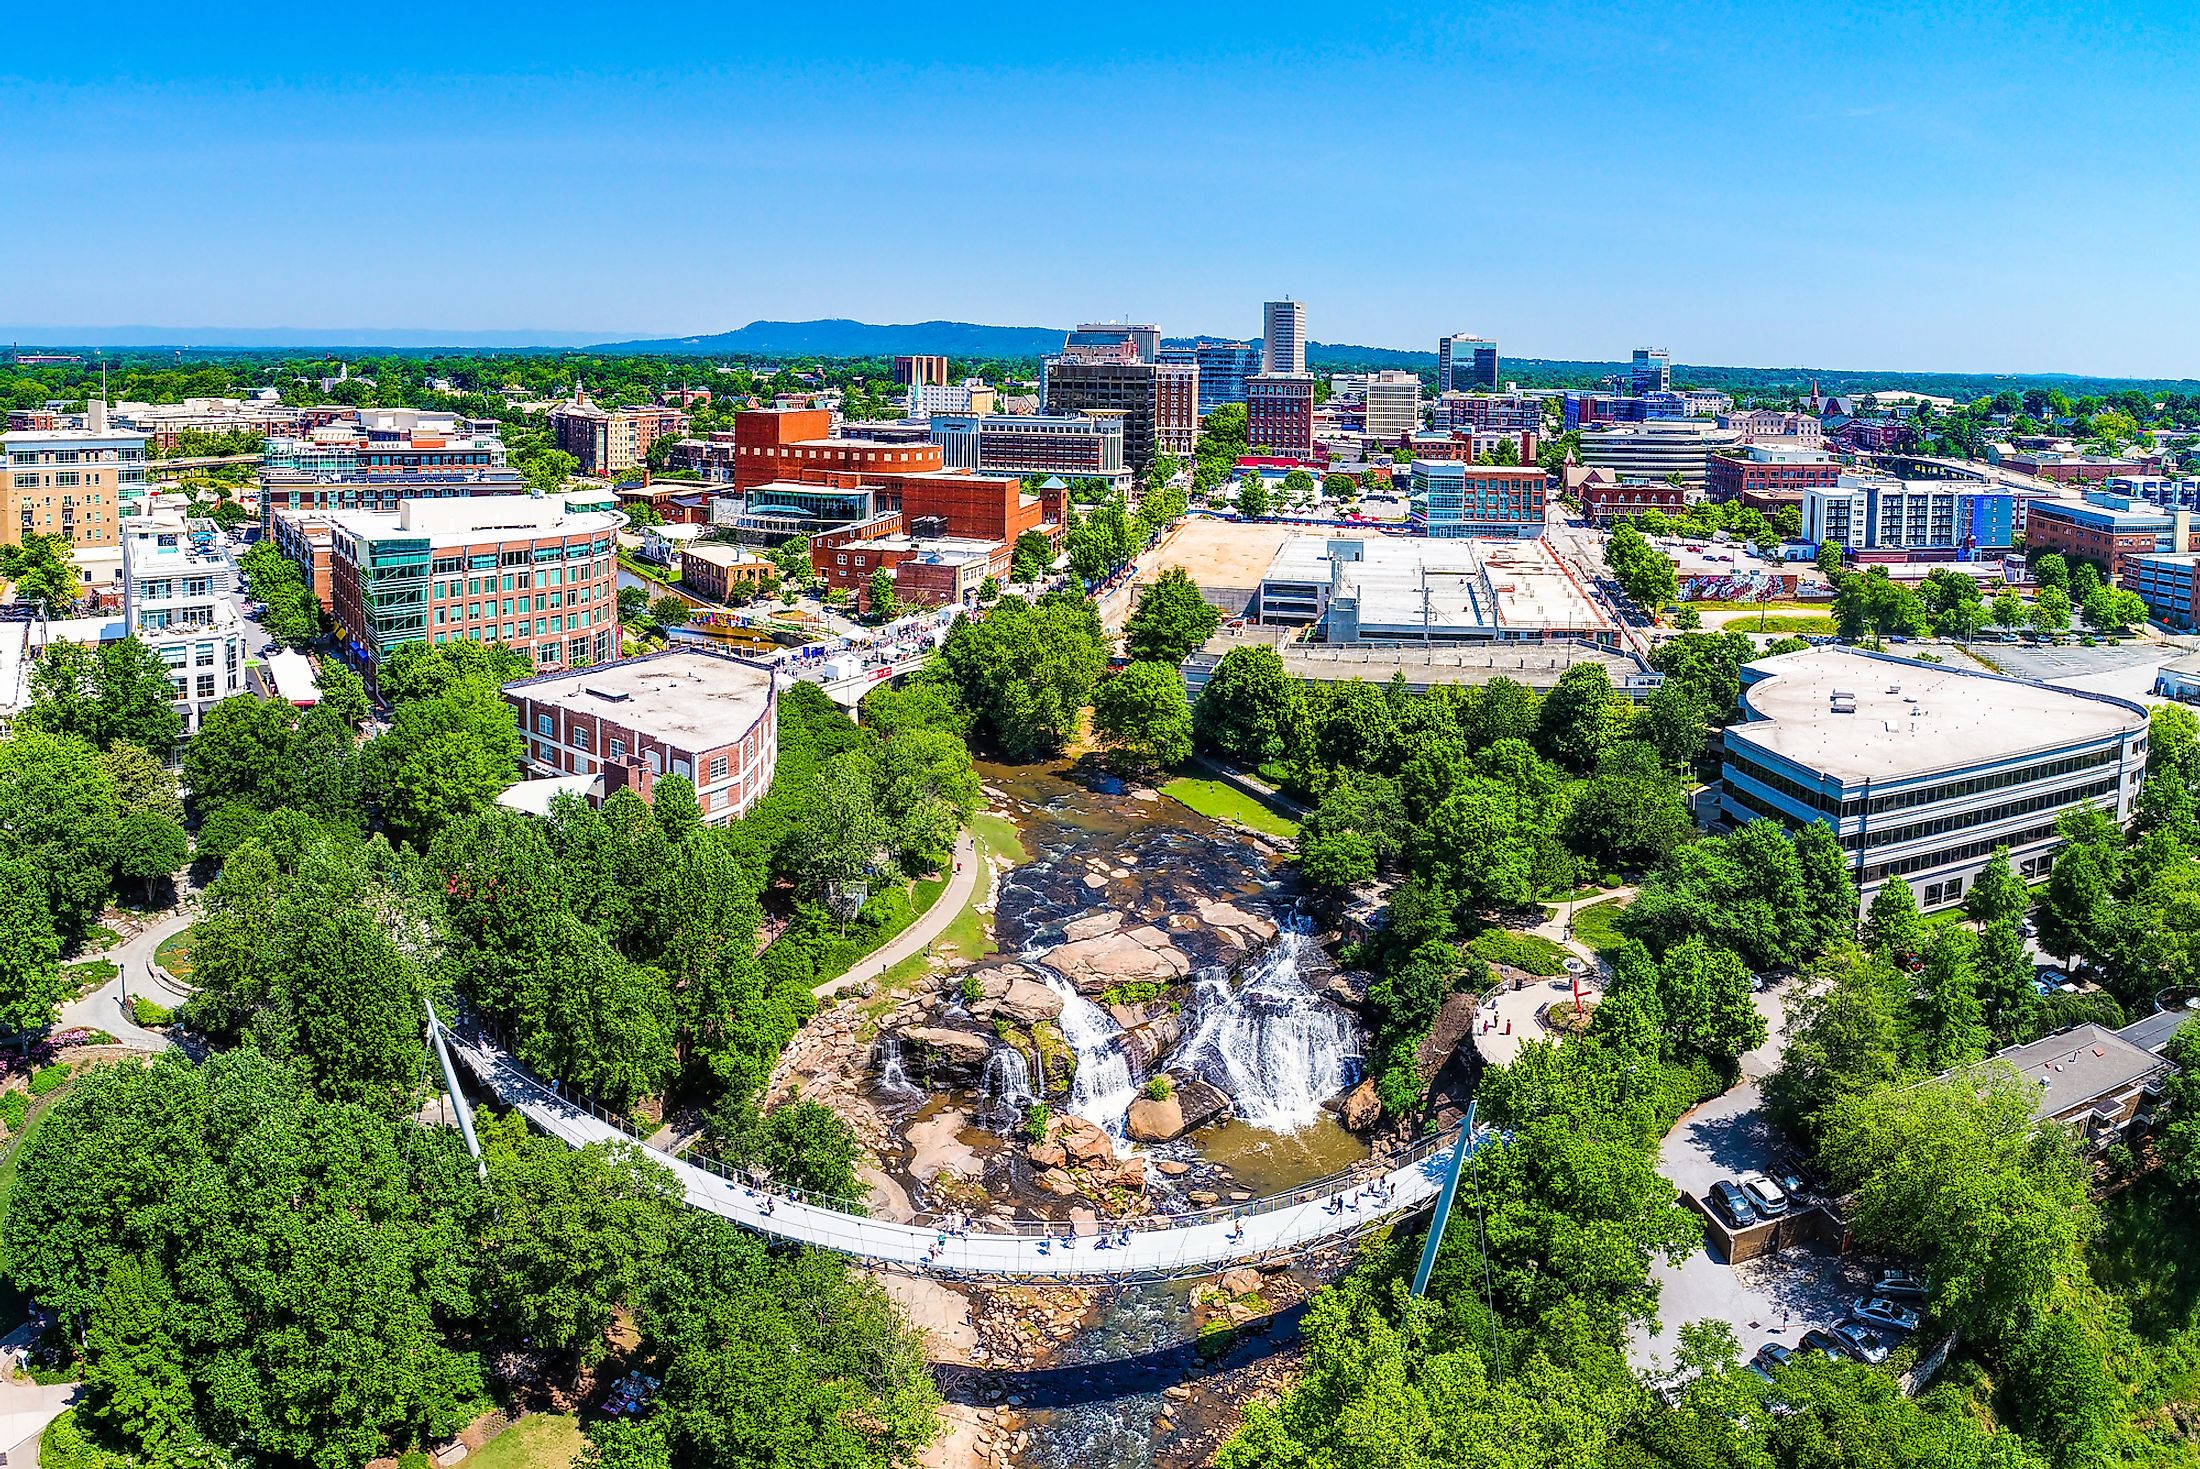 Aerial view of the city of Greenville in South Carolina.